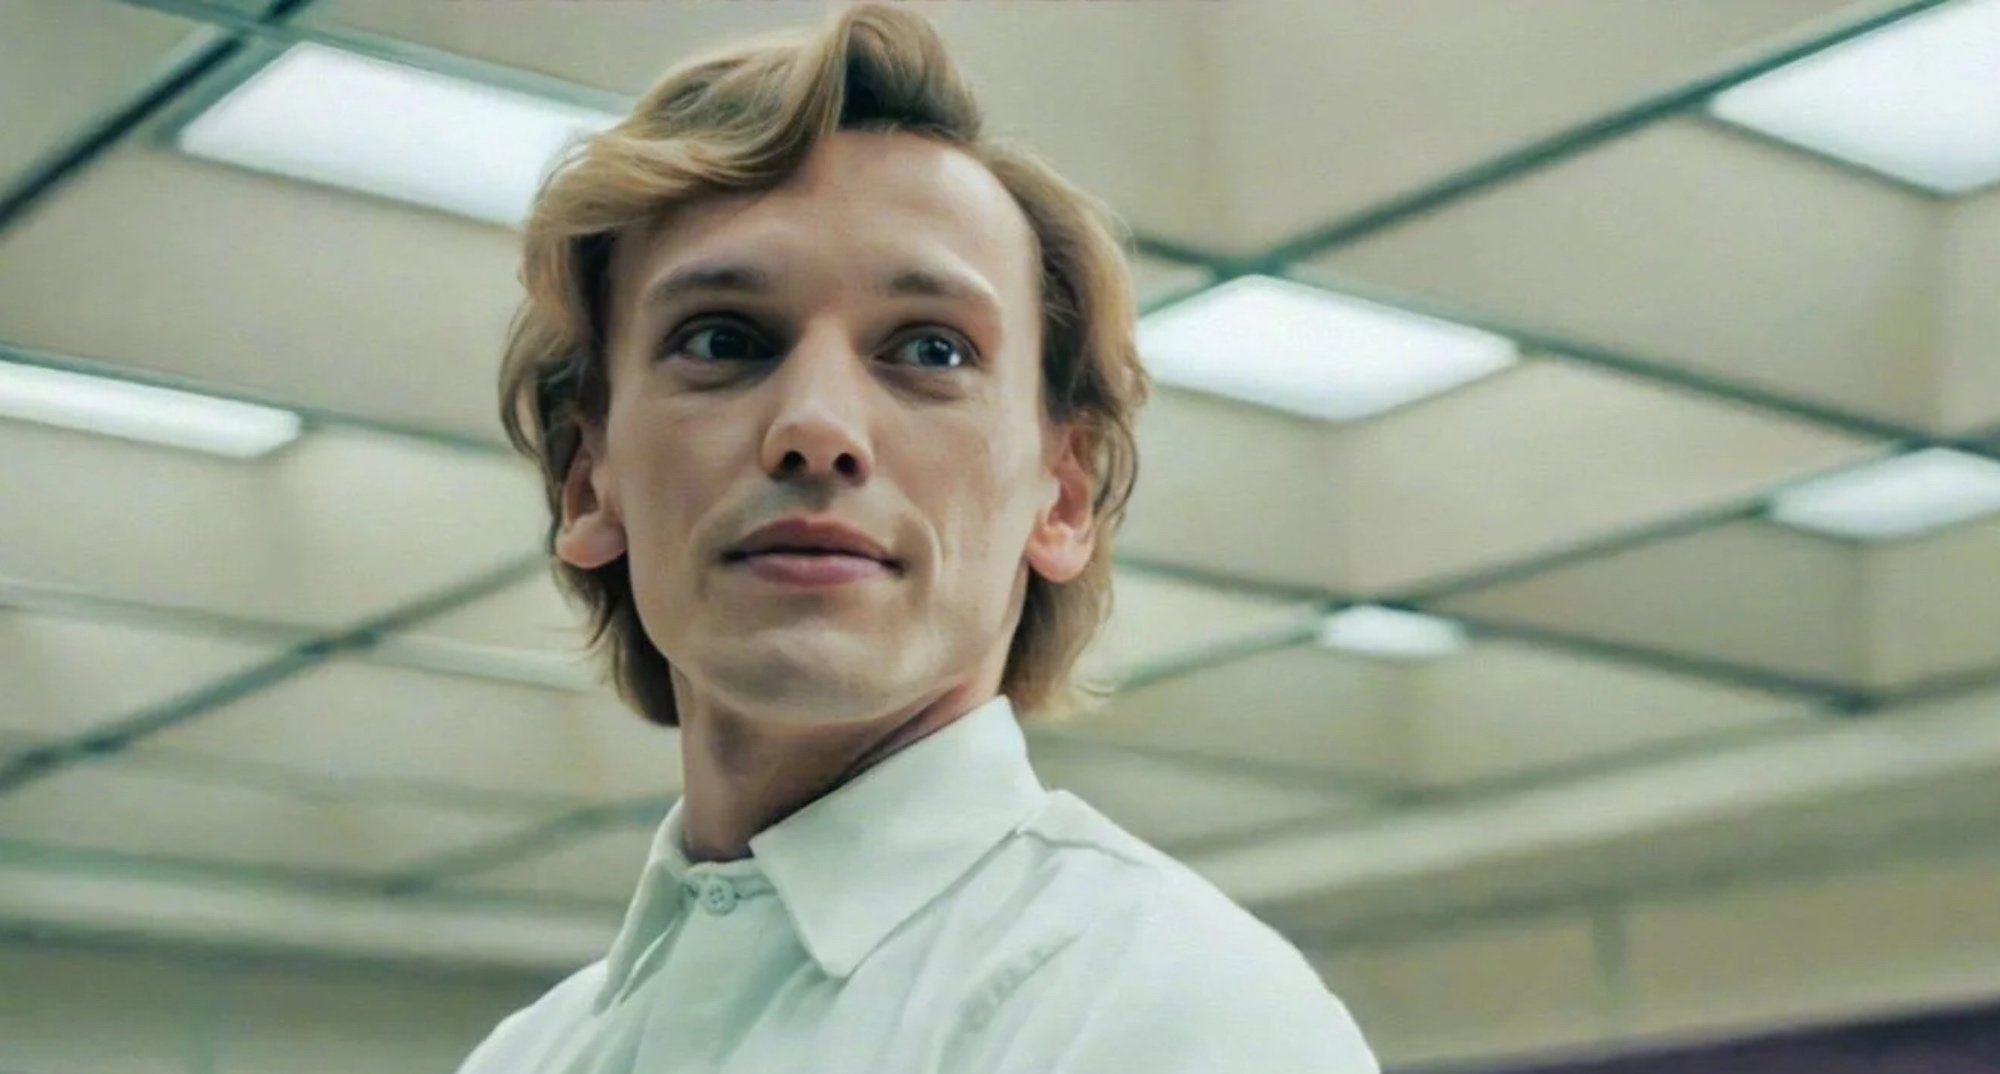 ‘Stranger Things’ Fans Grapple With Jamie Campbell Bower’s Role: ‘If Evil, Why Hot?’